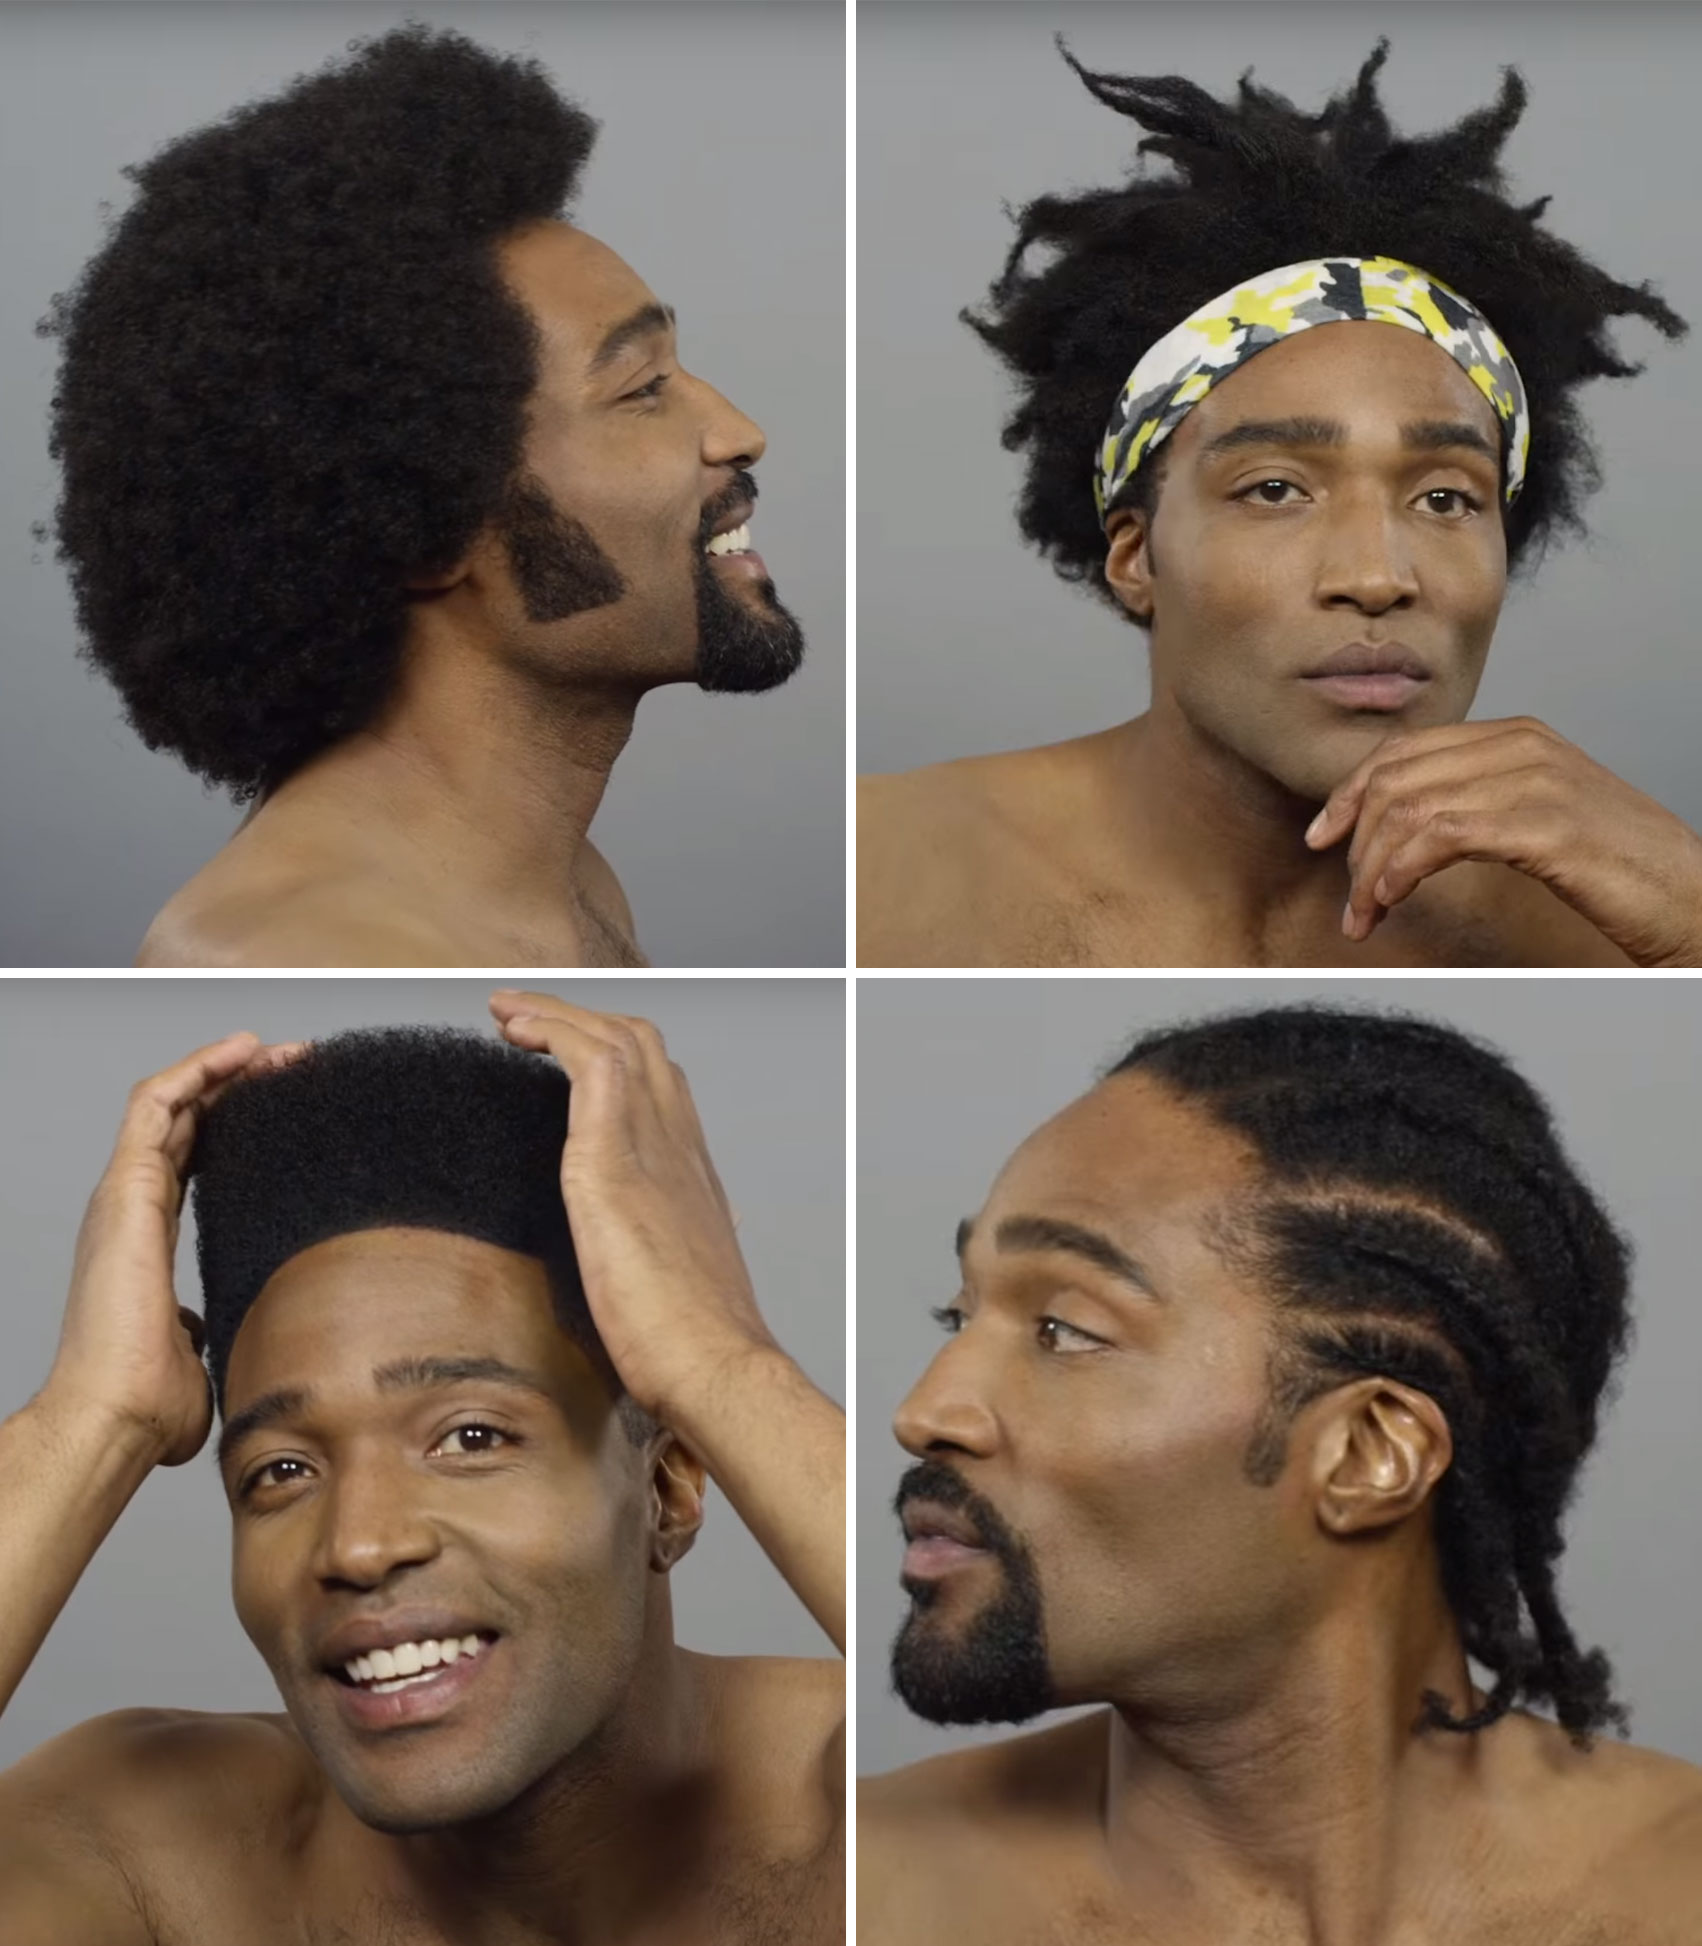 100 Years Of Black Hair Cut Revisits Iconic Men S Hairstyles